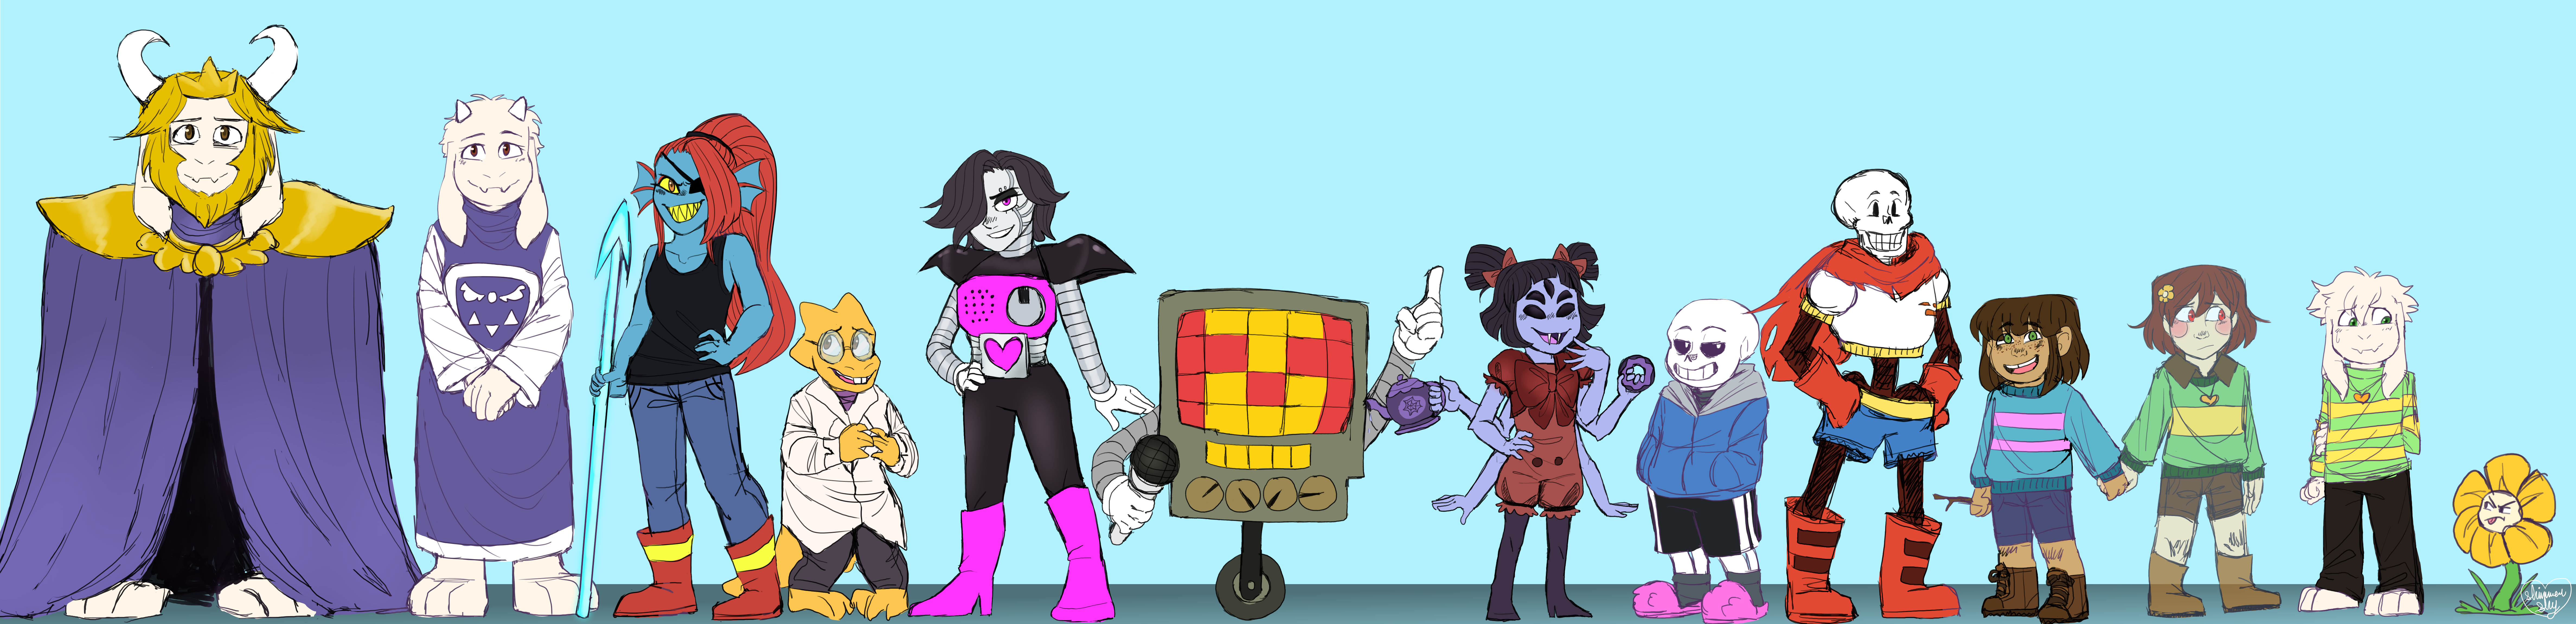 Undertale Characters Height Reference by Shimmer-Shy on DeviantArt